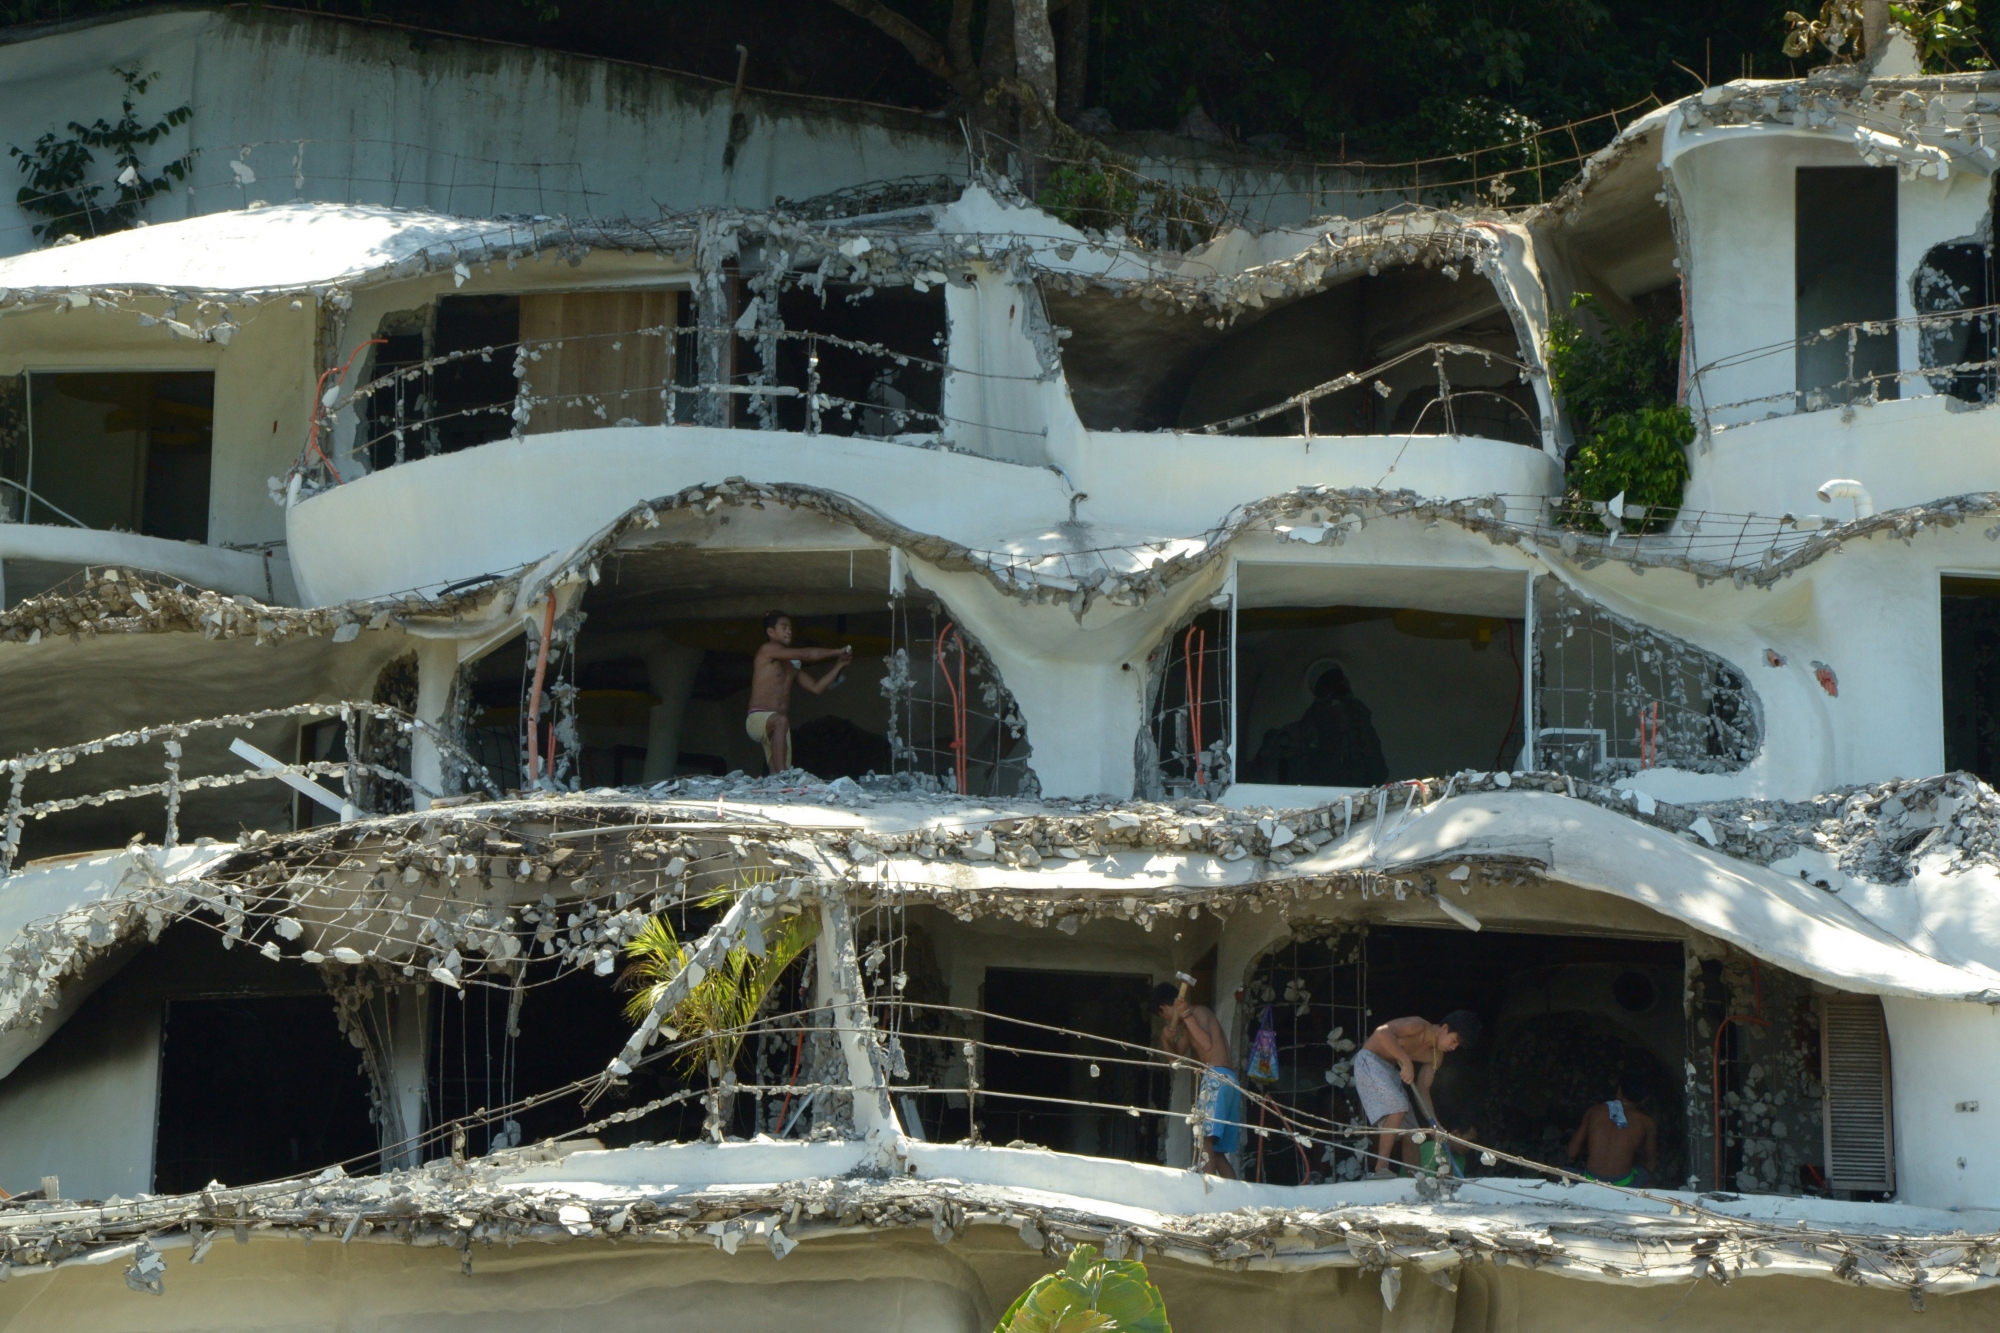 epa06693855 A view of hotel being demolished in the resort island of Boracay, Philippines 26 April 2018. The Philippines' famous Boracay island was closed to the public for six months, on April 26, for sanitation and development work at the tourist destination, which the country's president had called a 'cesspool.' Beginning at midnight, authorities banned visitors entry to the island, located about 300 kilometers (186 miles) south of Manila, the Department of Environment and Natural Resources reported. In February, President Rodrigo Duterte called the resort a "cesspool" because of its water contamination and later ordered the total closure to the public for six months to resolve environmental issues.  EPA/JO HARESH TANODRA PHILIPPINES TOURISM